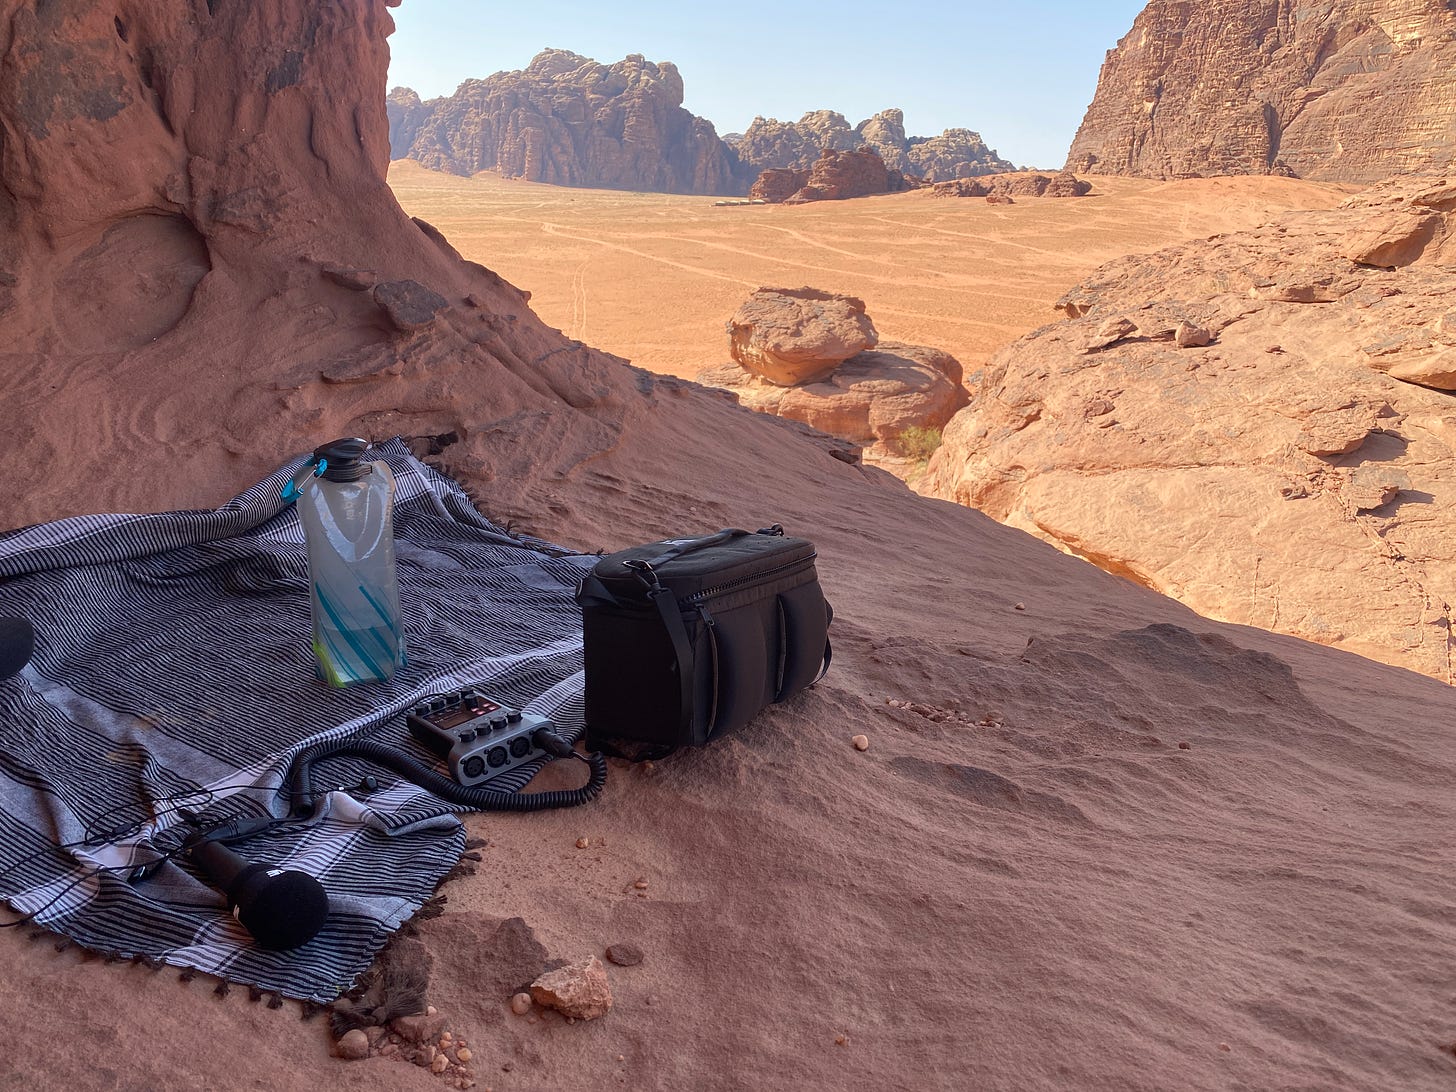 Our recording equipment in the Wadi Rum desert - a water bottle, a camera bag, a podcast recorded and a scarf as blanket. Desert rock vistas in the background.